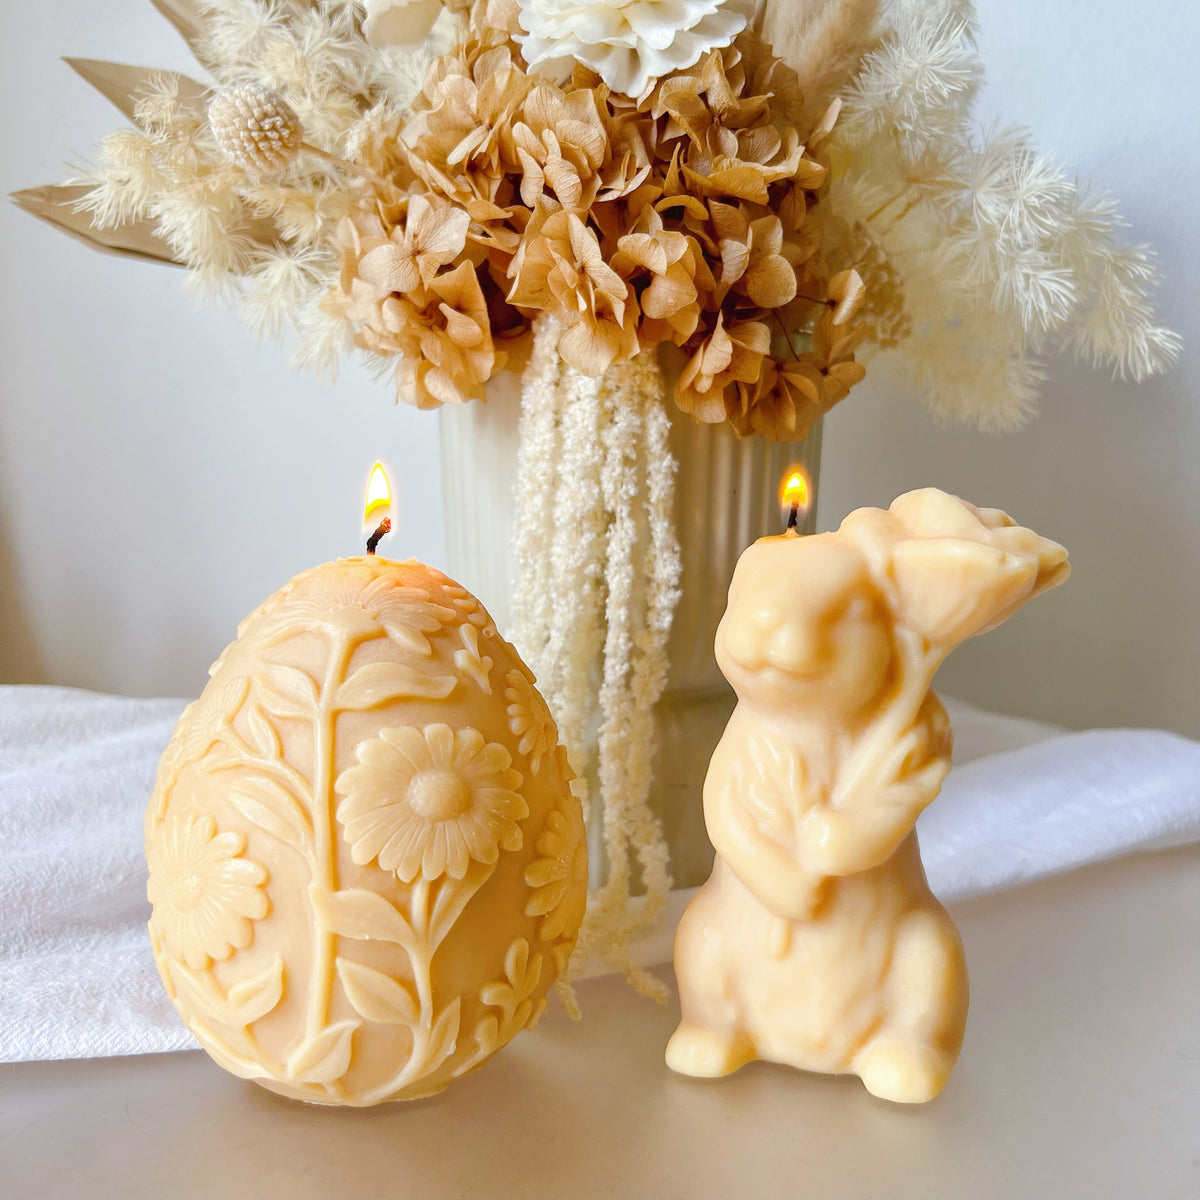 Flower Bunny Scented Soy Candle - Easter Décor & Gifts | LMJ Candles